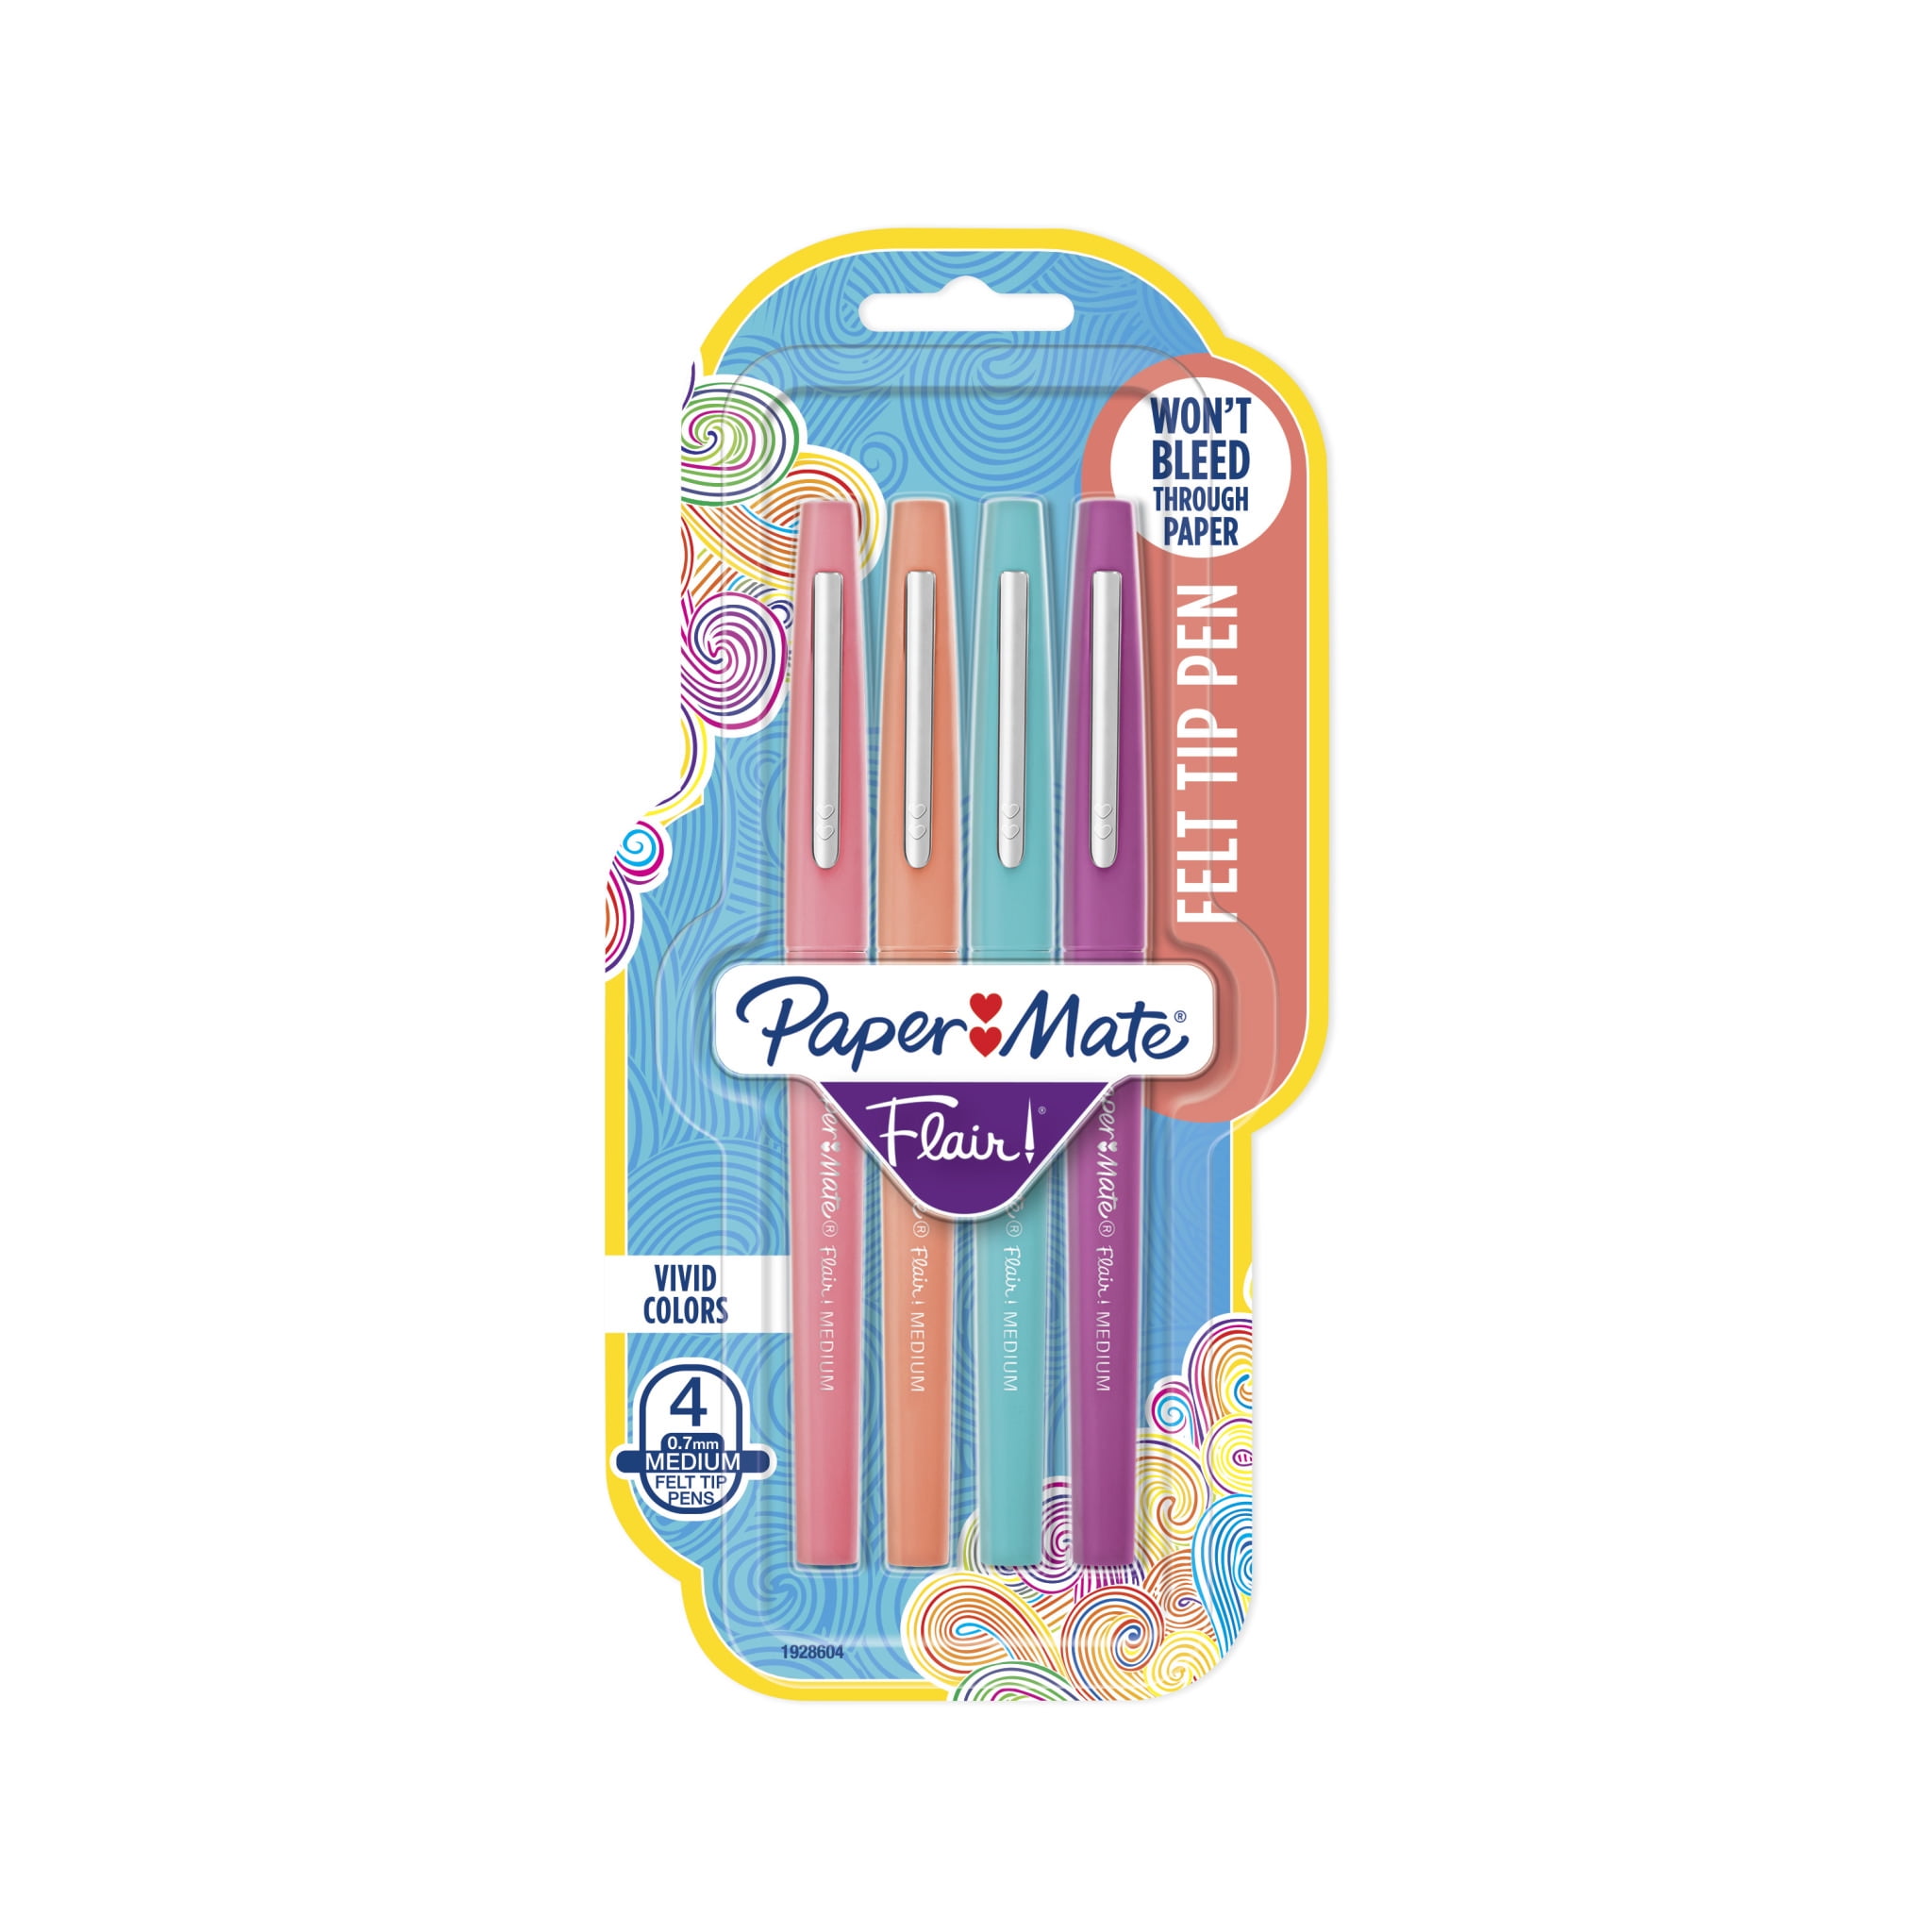 Flair Felt Tip Markers, Assorted Tropical Colors, Pack of 12, Mardel